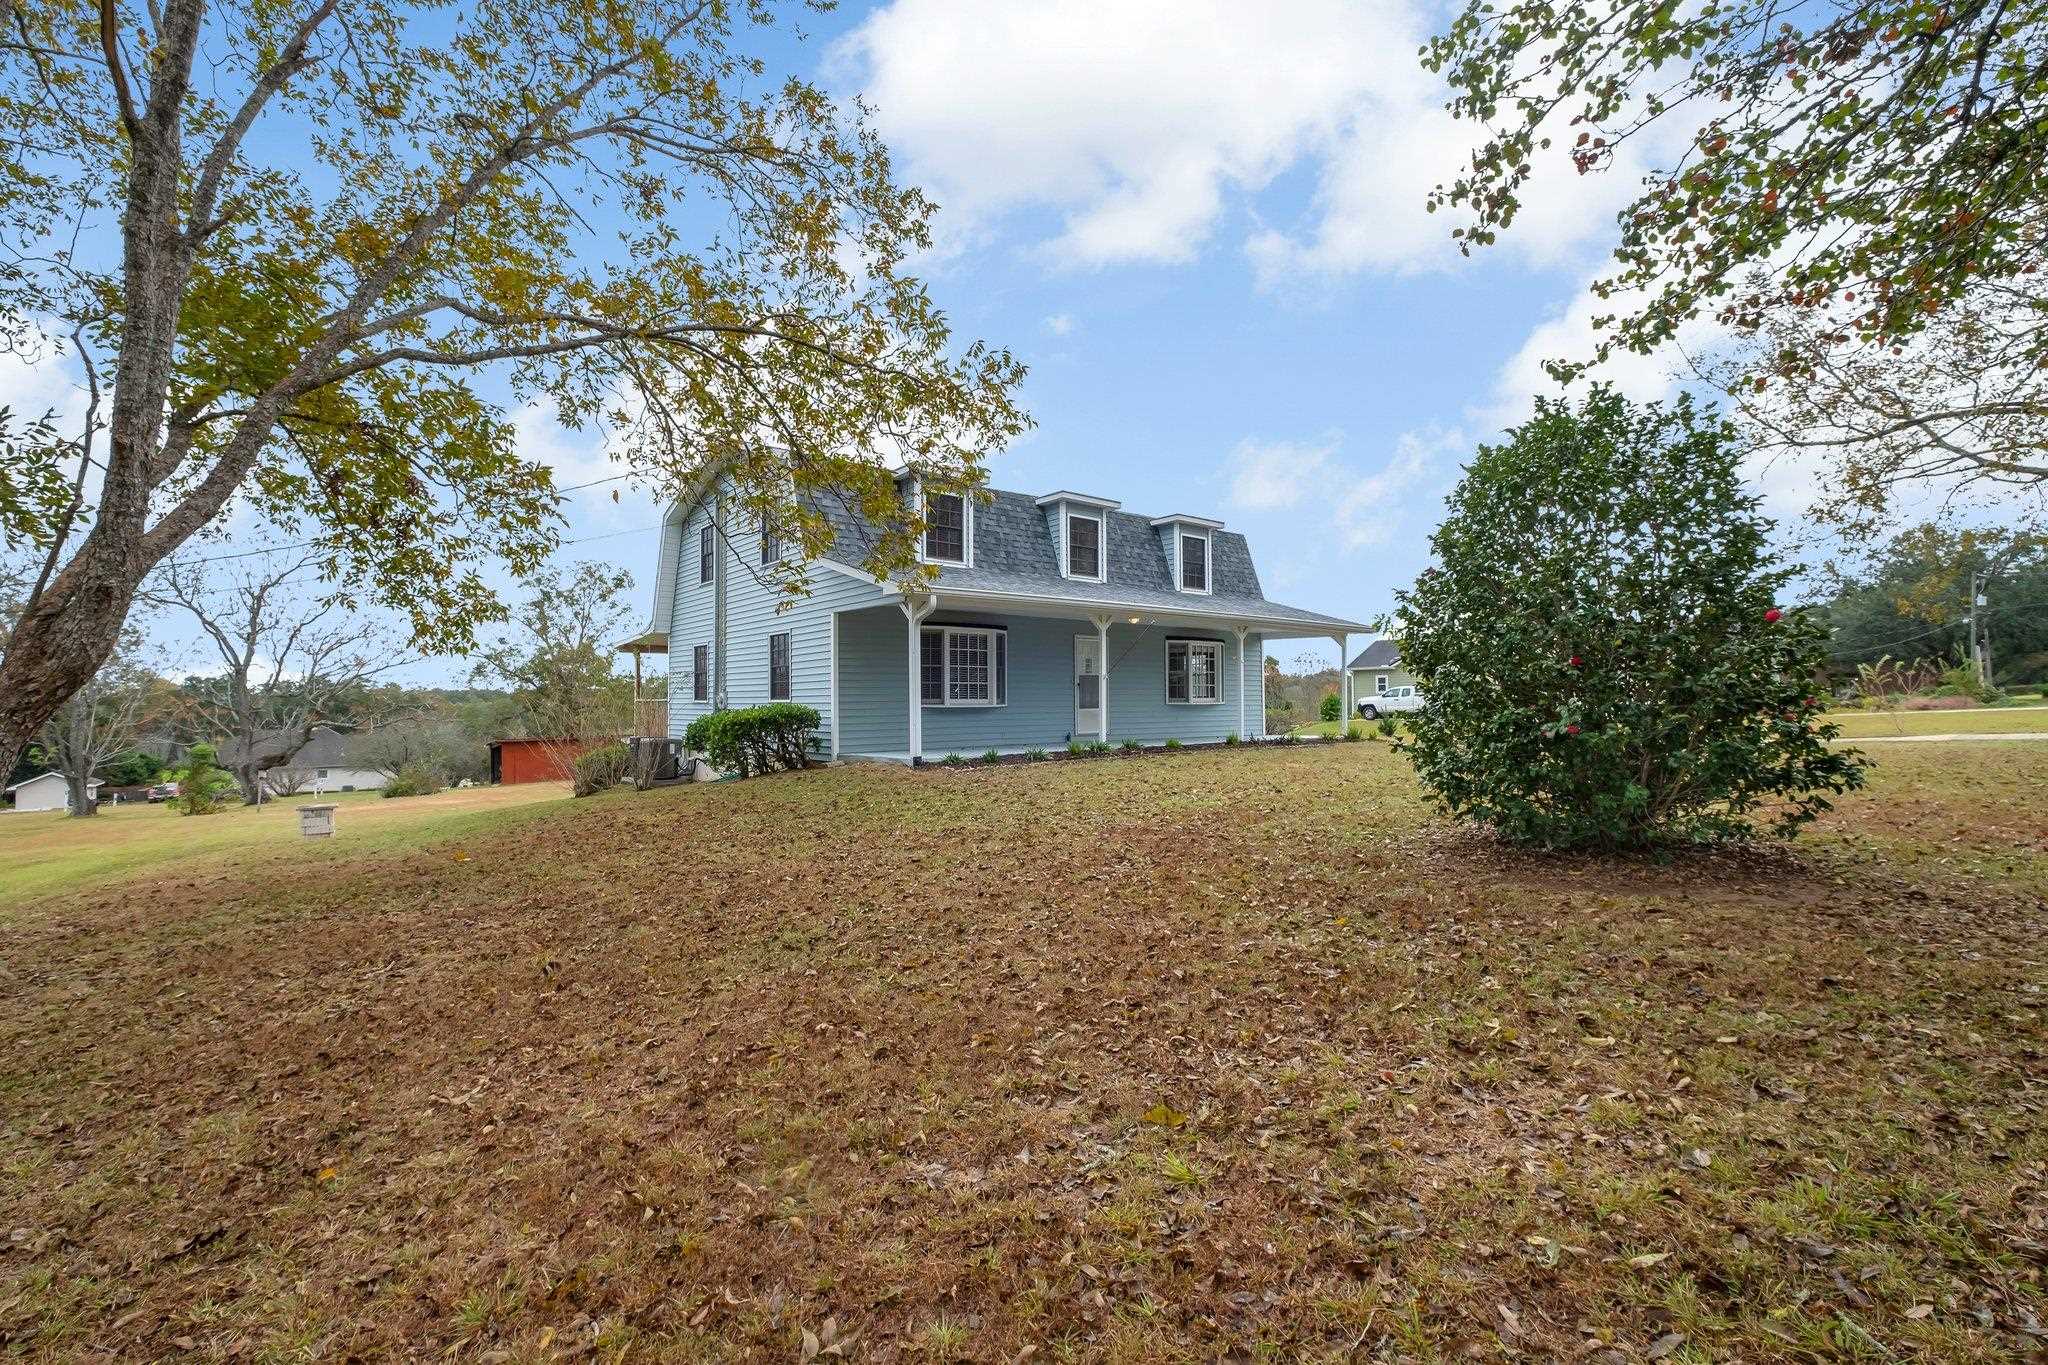 1431 Tung Hill Drive,TALLAHASSEE,Florida 32317,3 Bedrooms Bedrooms,3 BathroomsBathrooms,Detached single family,1431 Tung Hill Drive,367353